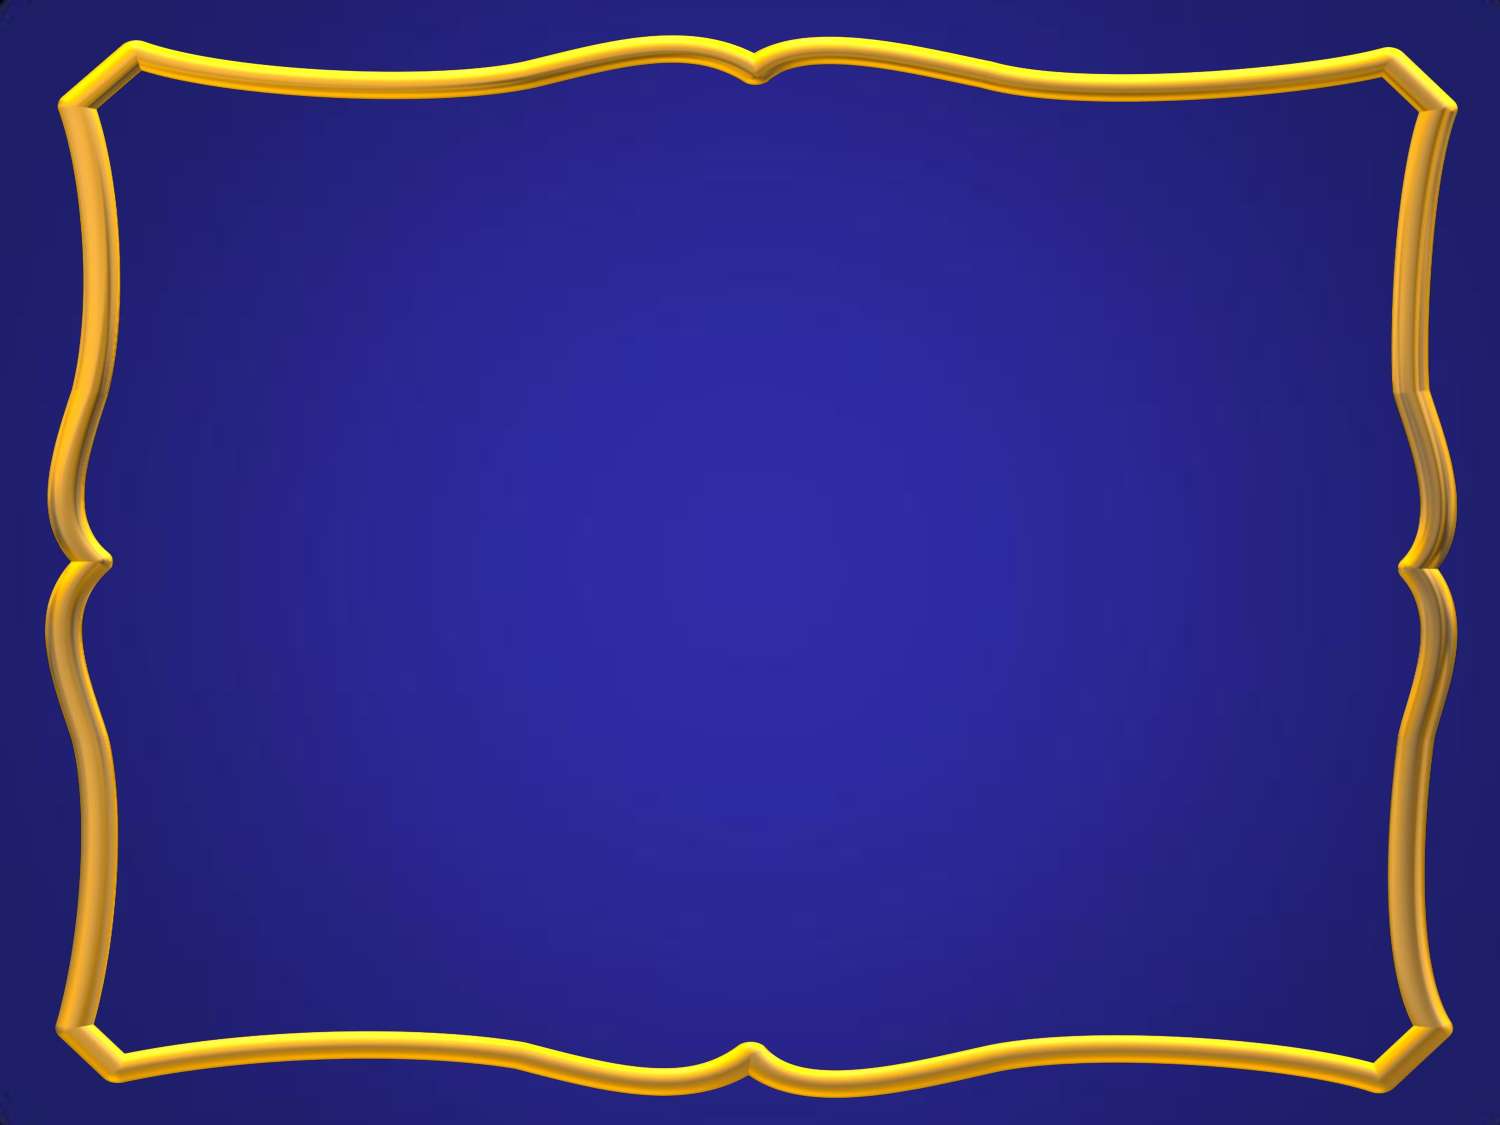 Blue and Gold Border Designs